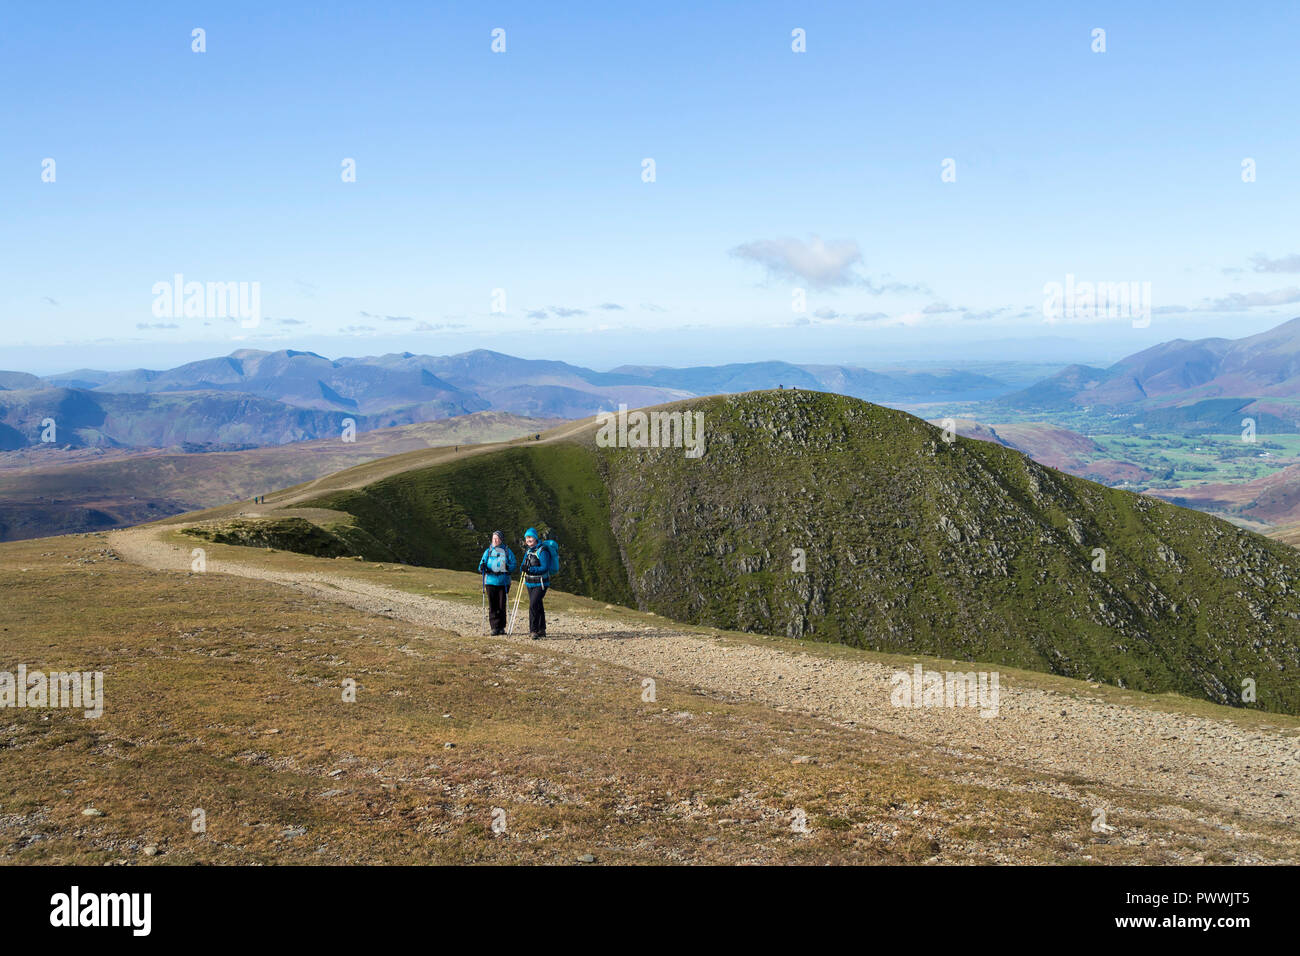 Lower Man Viewed From Helvellyn, Lake District, Cumbria, UK Stock Photo